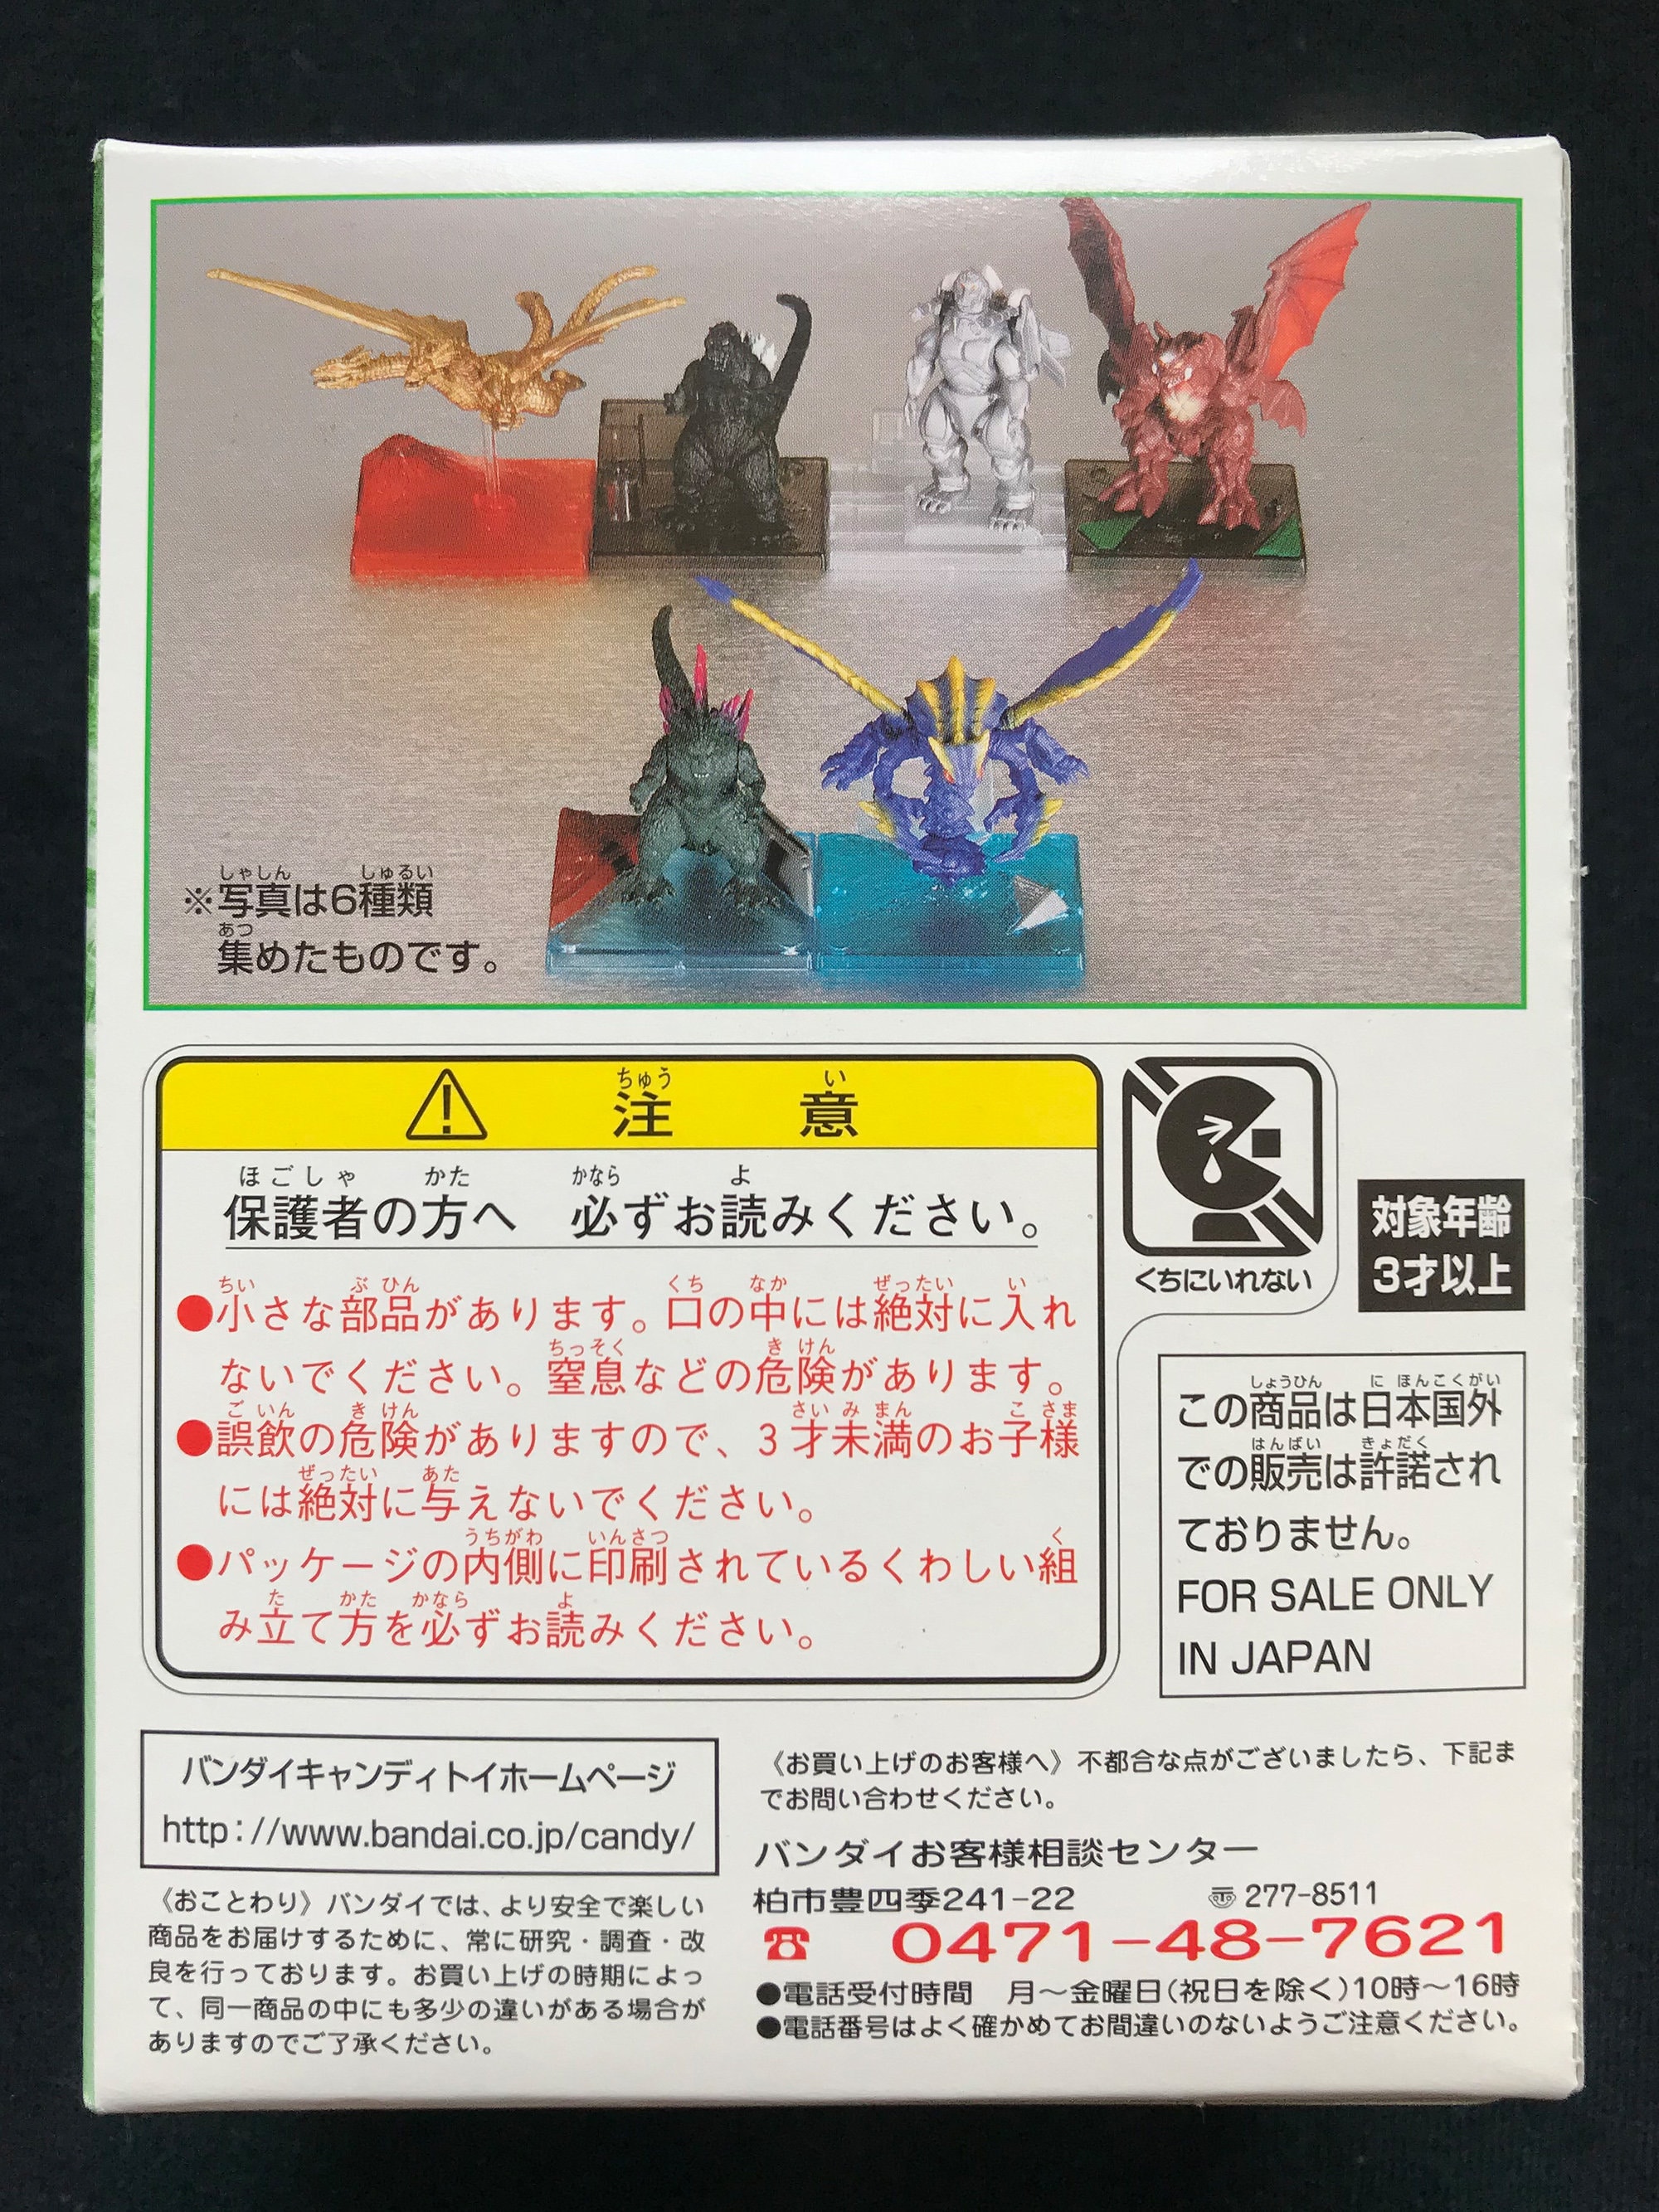 Bandai Godzilla Candy Toy Set of 6 Mini Figures Version a Ghidorah 71509 for sale online 